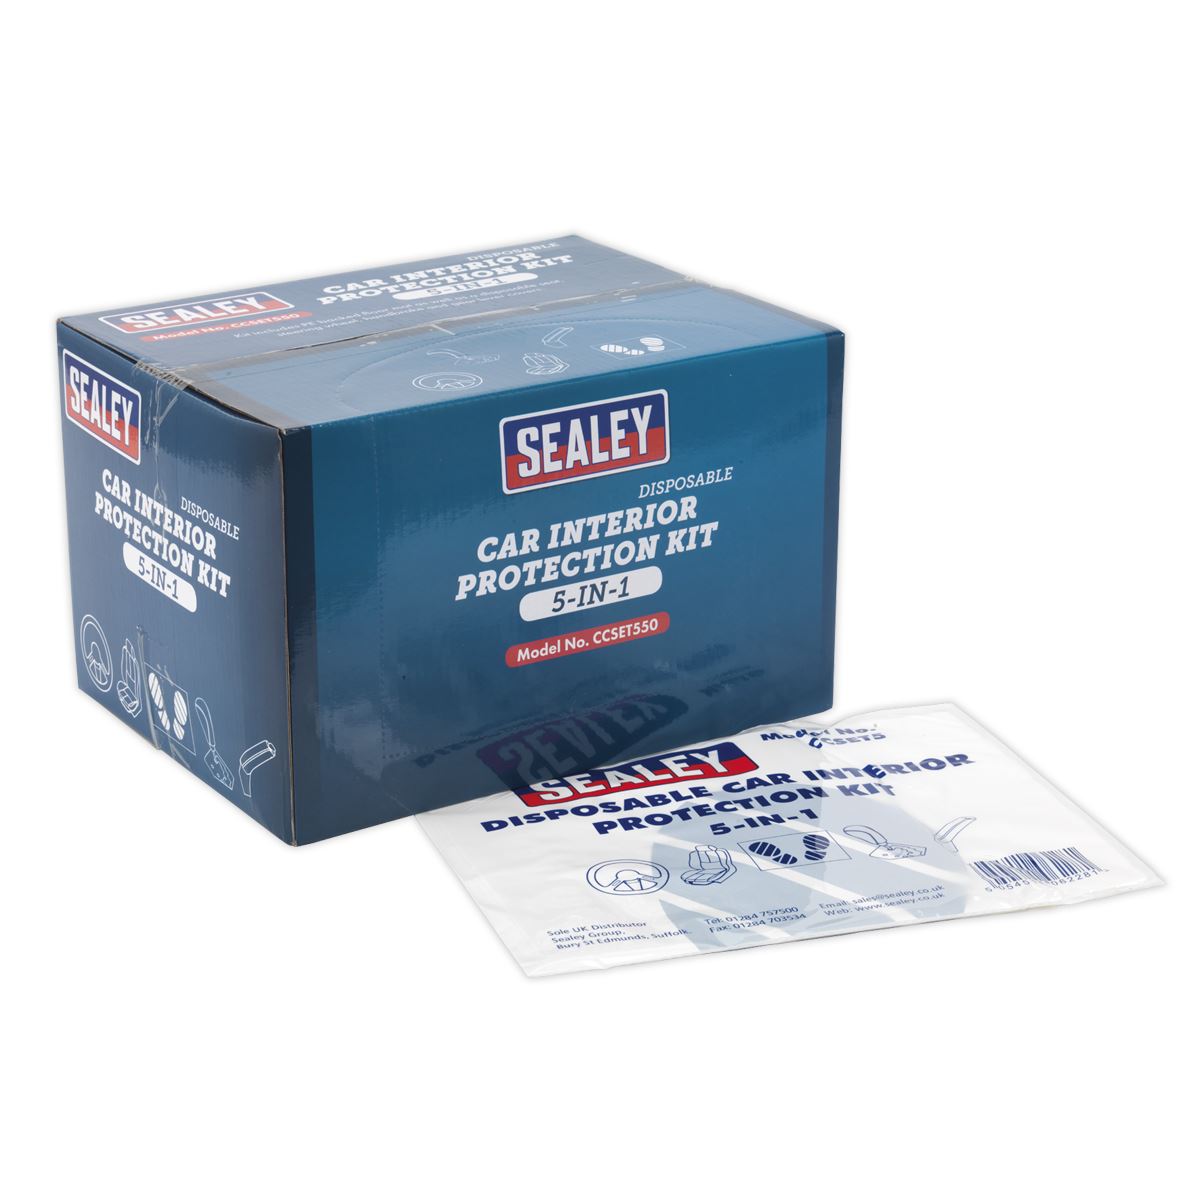 Sealey 5 in 1 Disposable Car Interior Protection Kit - Box of 50 Sets Seat Cover